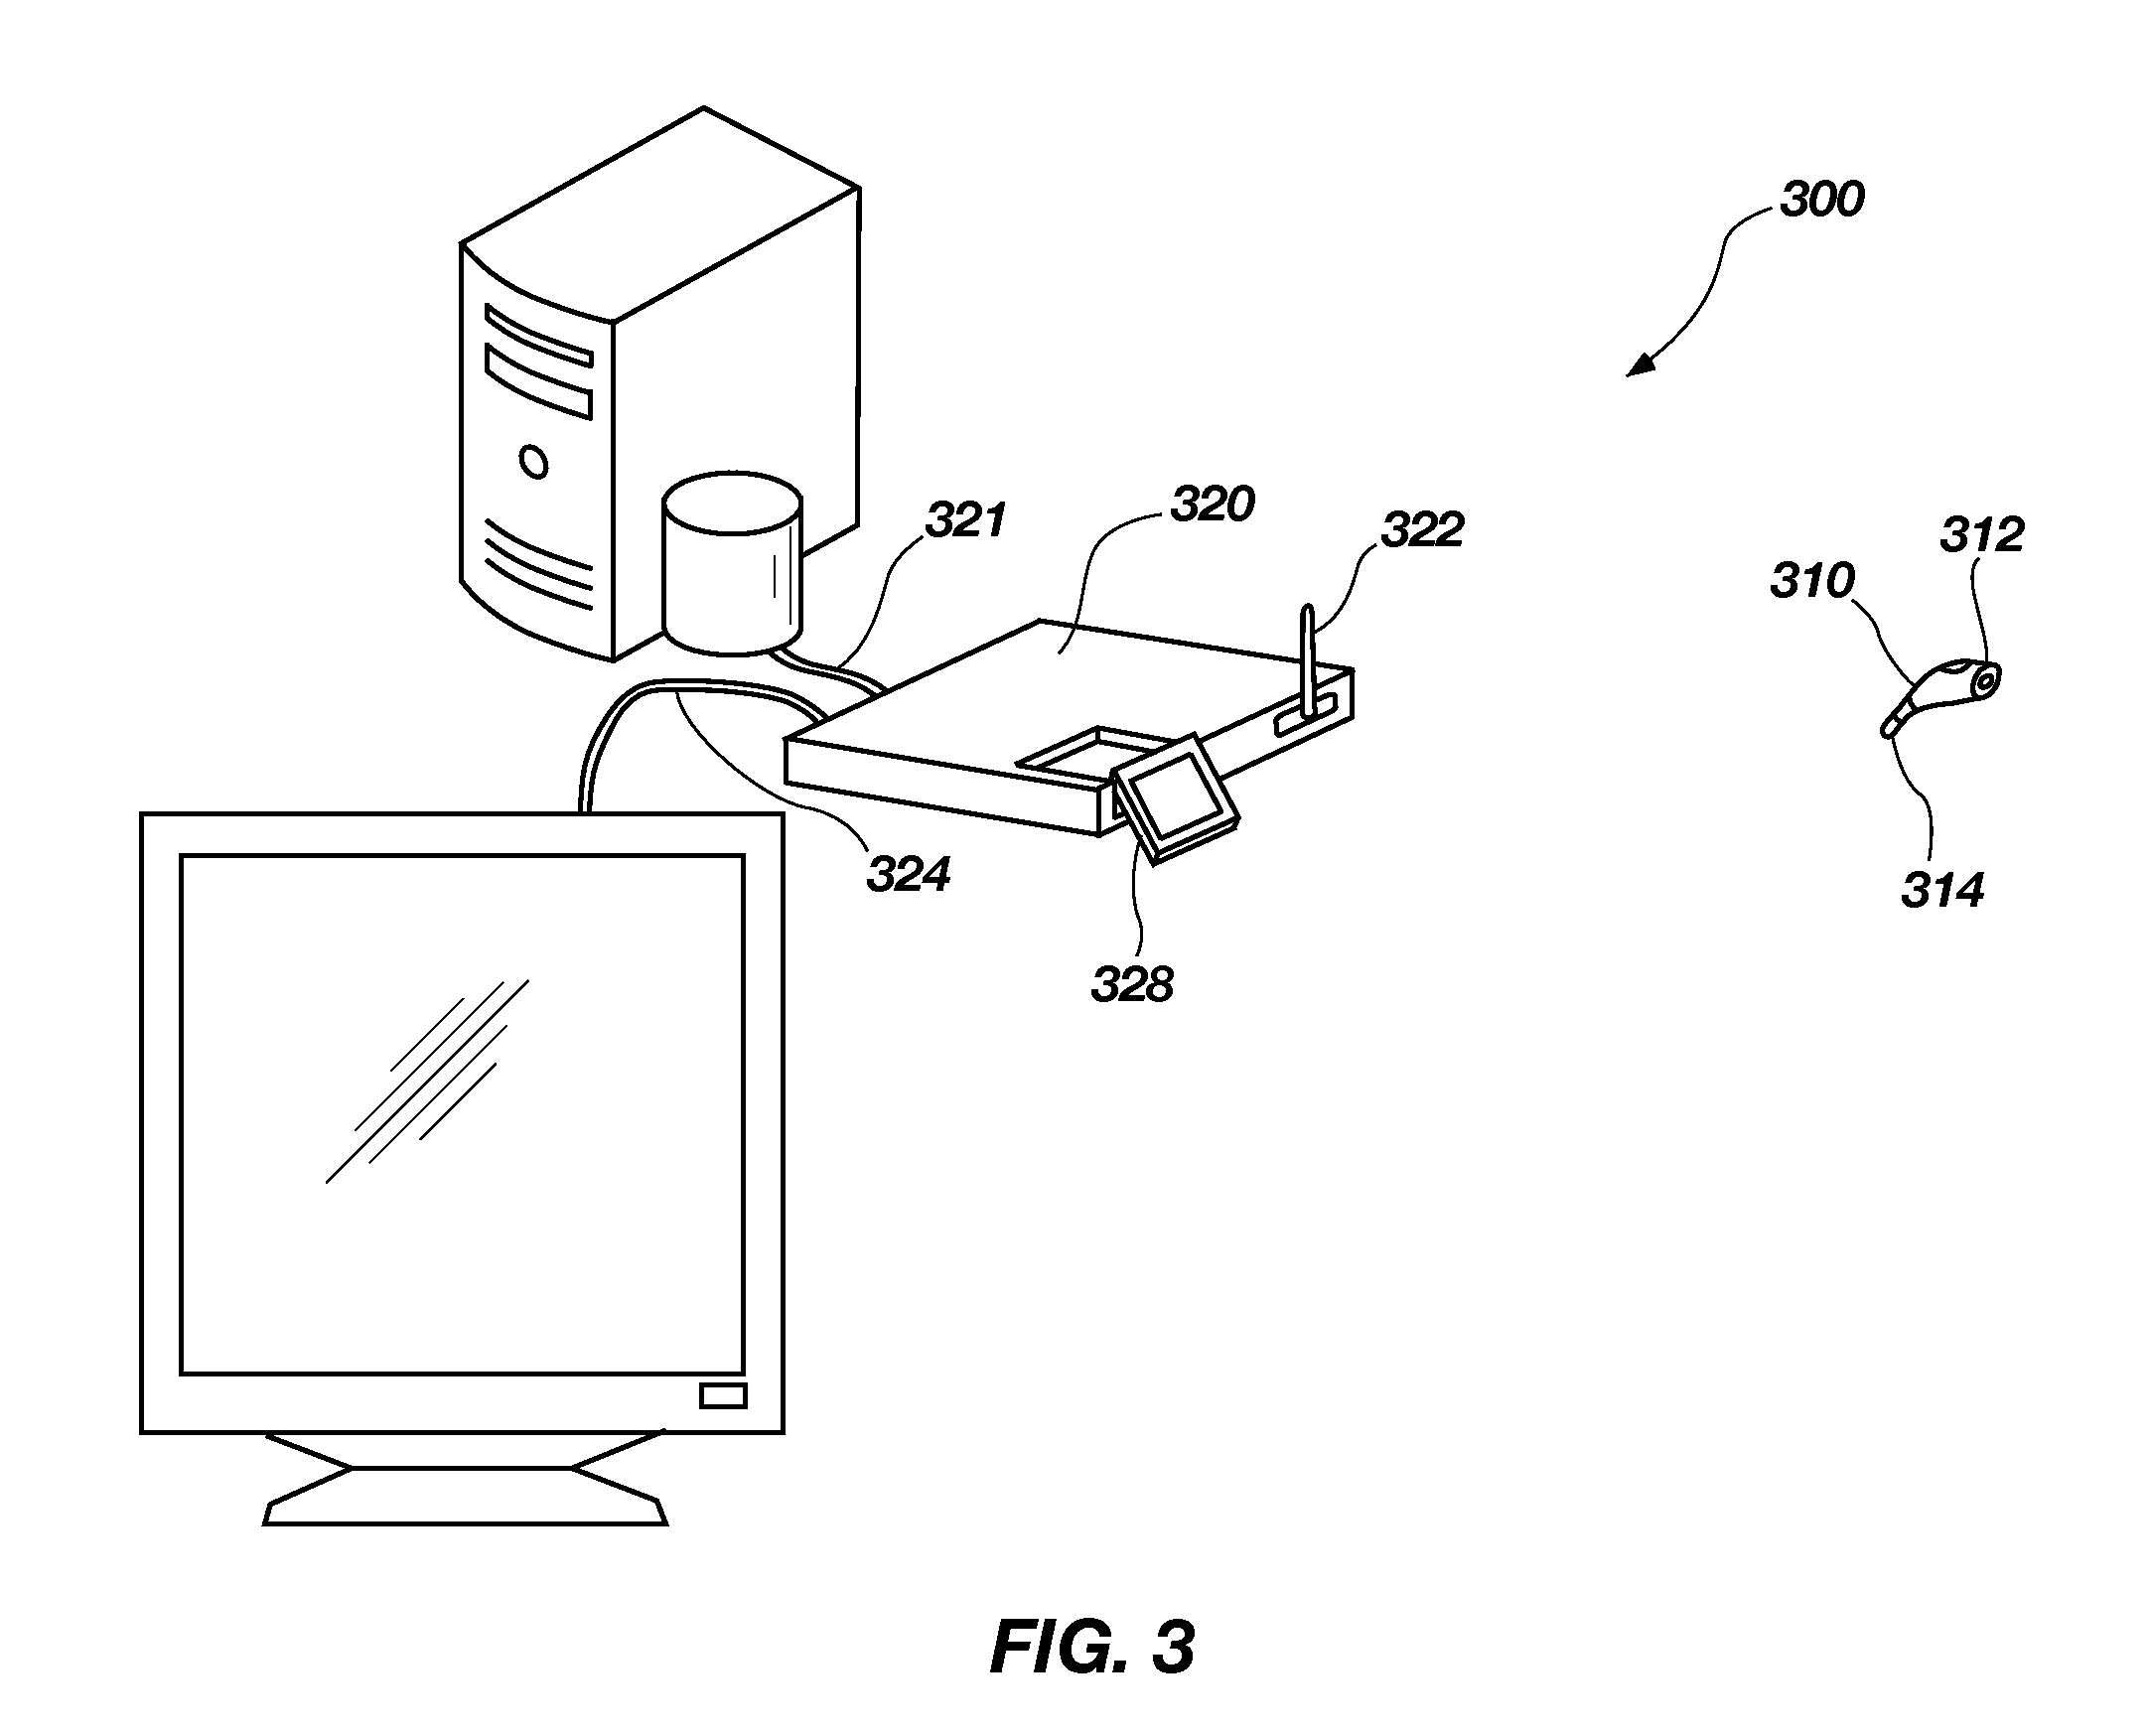 System, apparatus and methods for providing a single use imaging device for sterile environments